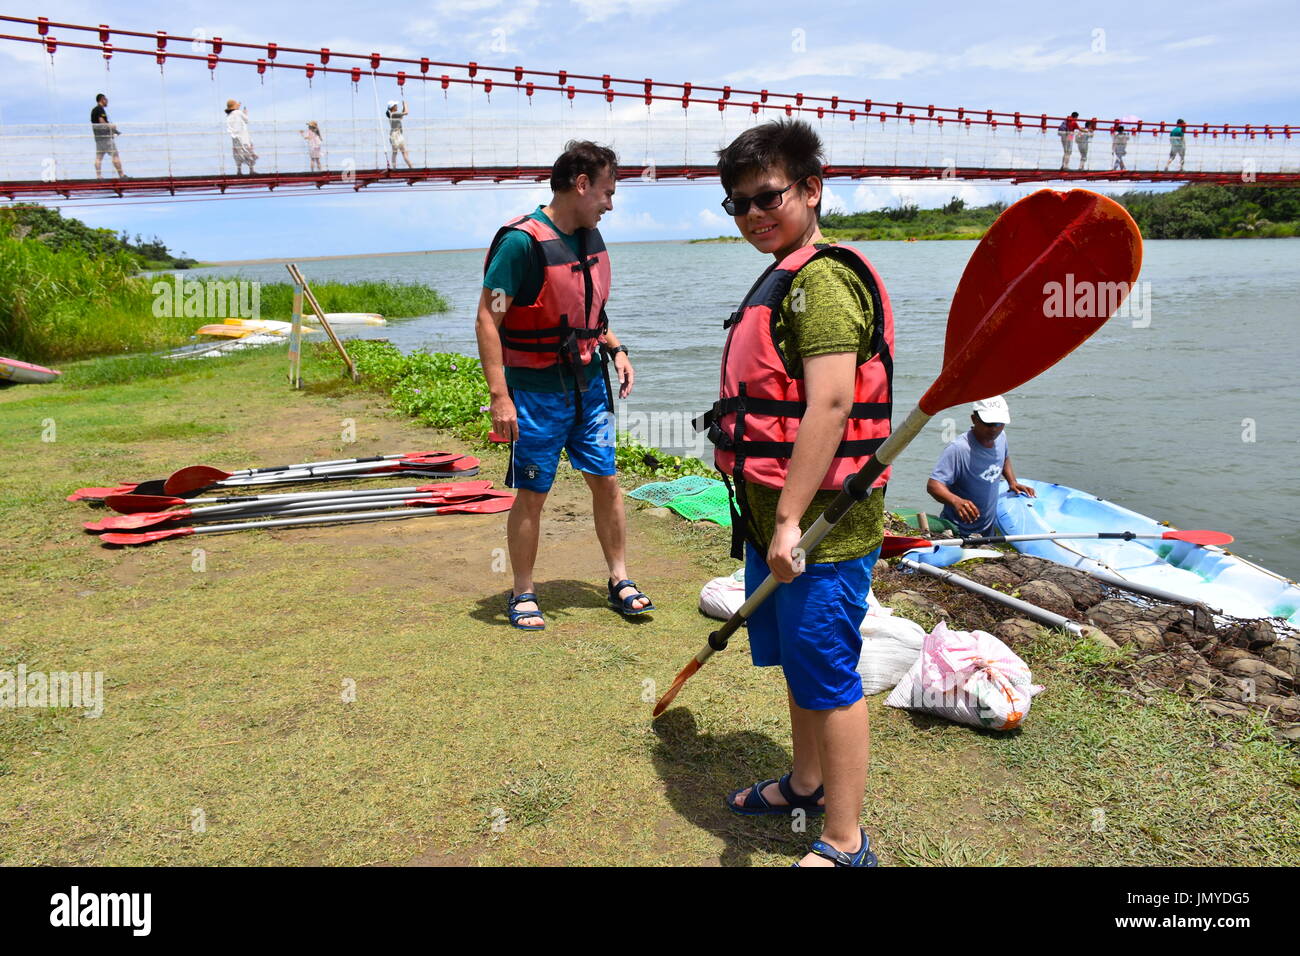 My husband and son canoeing on a lake outlet near coming from the ocean in Kenting, Taiwan. So fun, but a hot summer day. Stock Photo